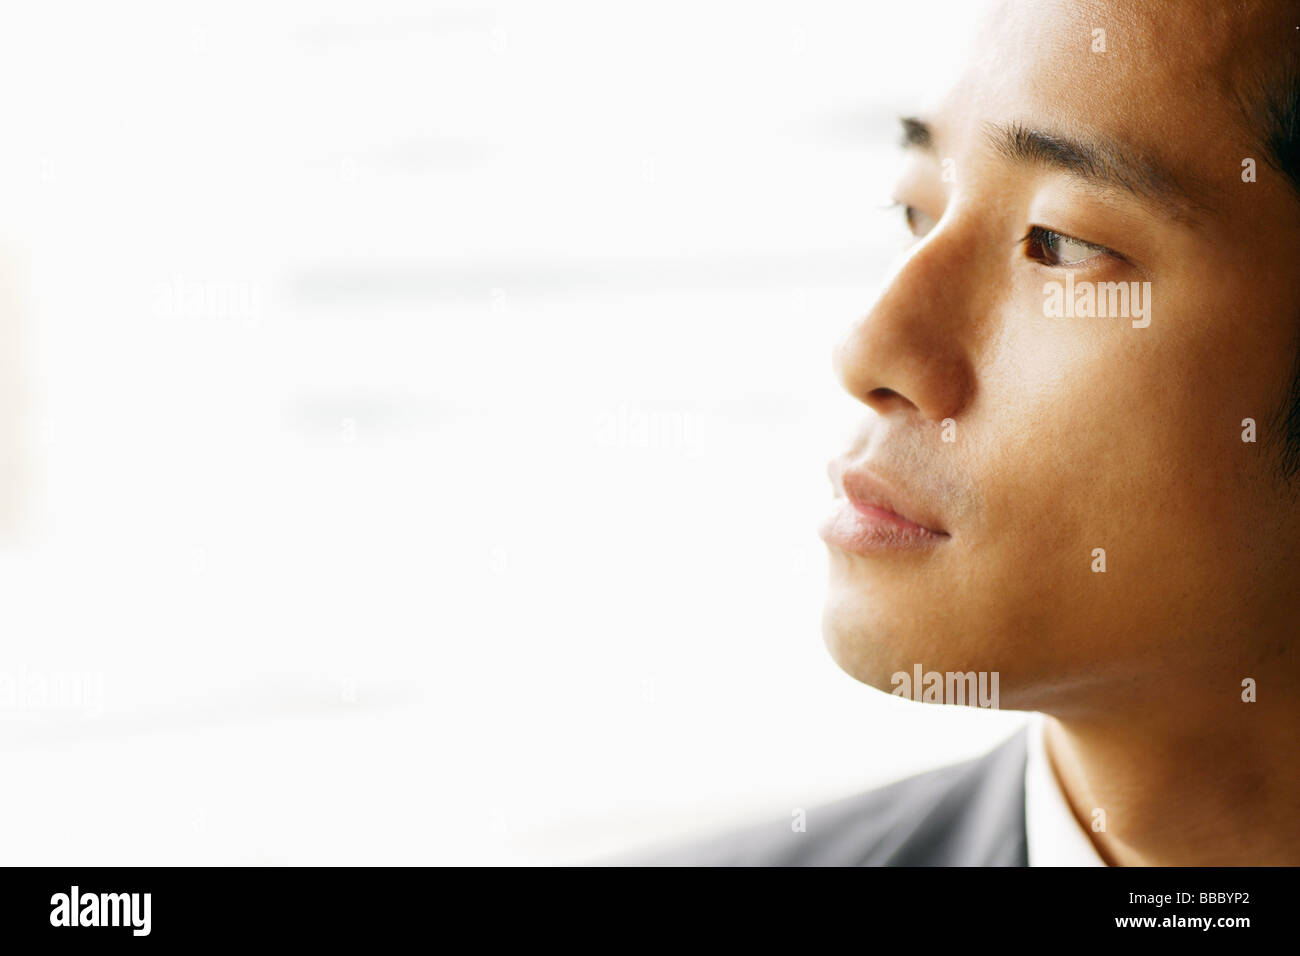 Man looking away, sideview Stock Photo